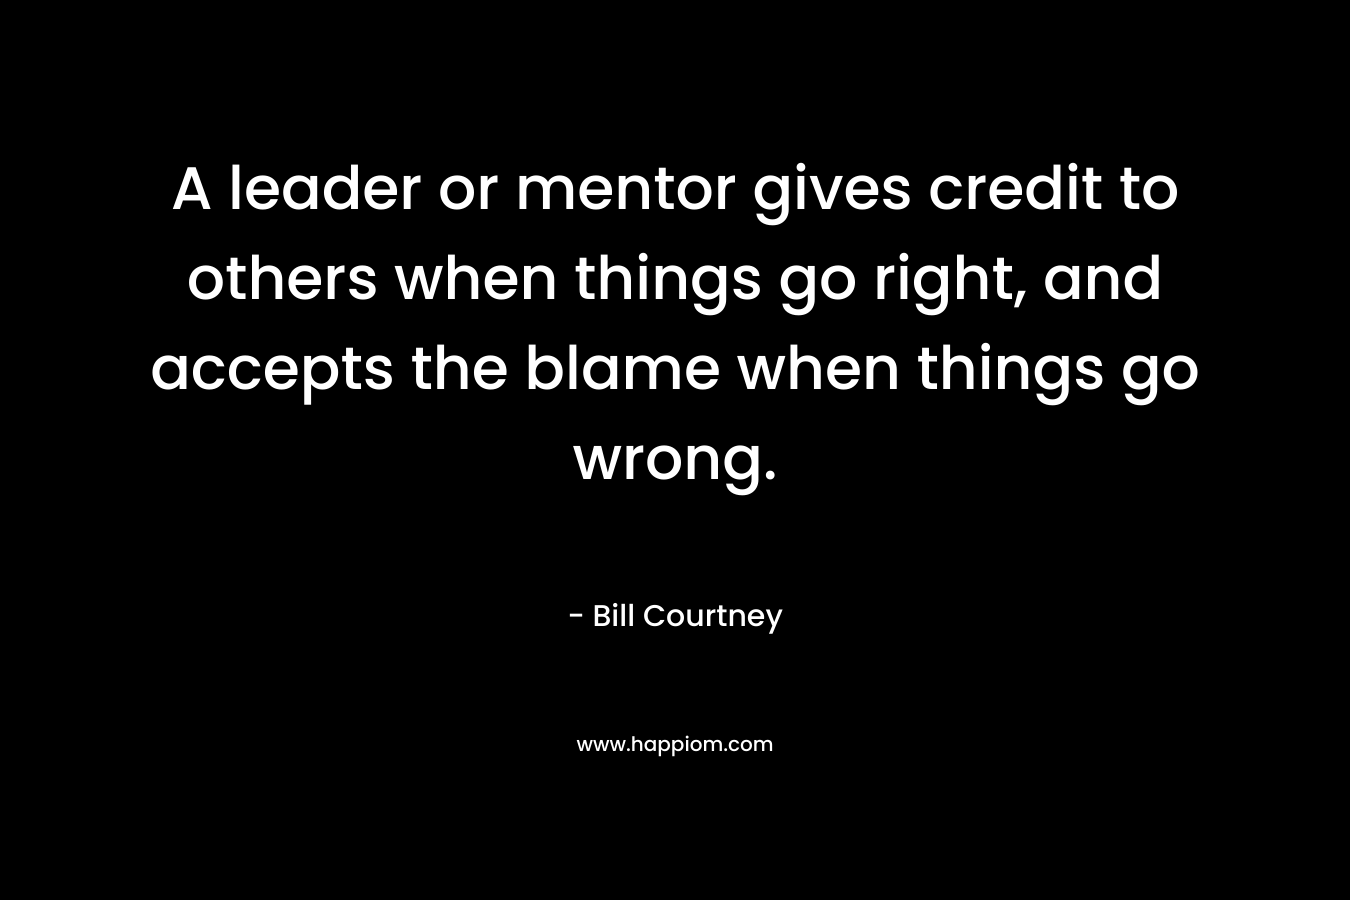 A leader or mentor gives credit to others when things go right, and accepts the blame when things go wrong. – Bill Courtney